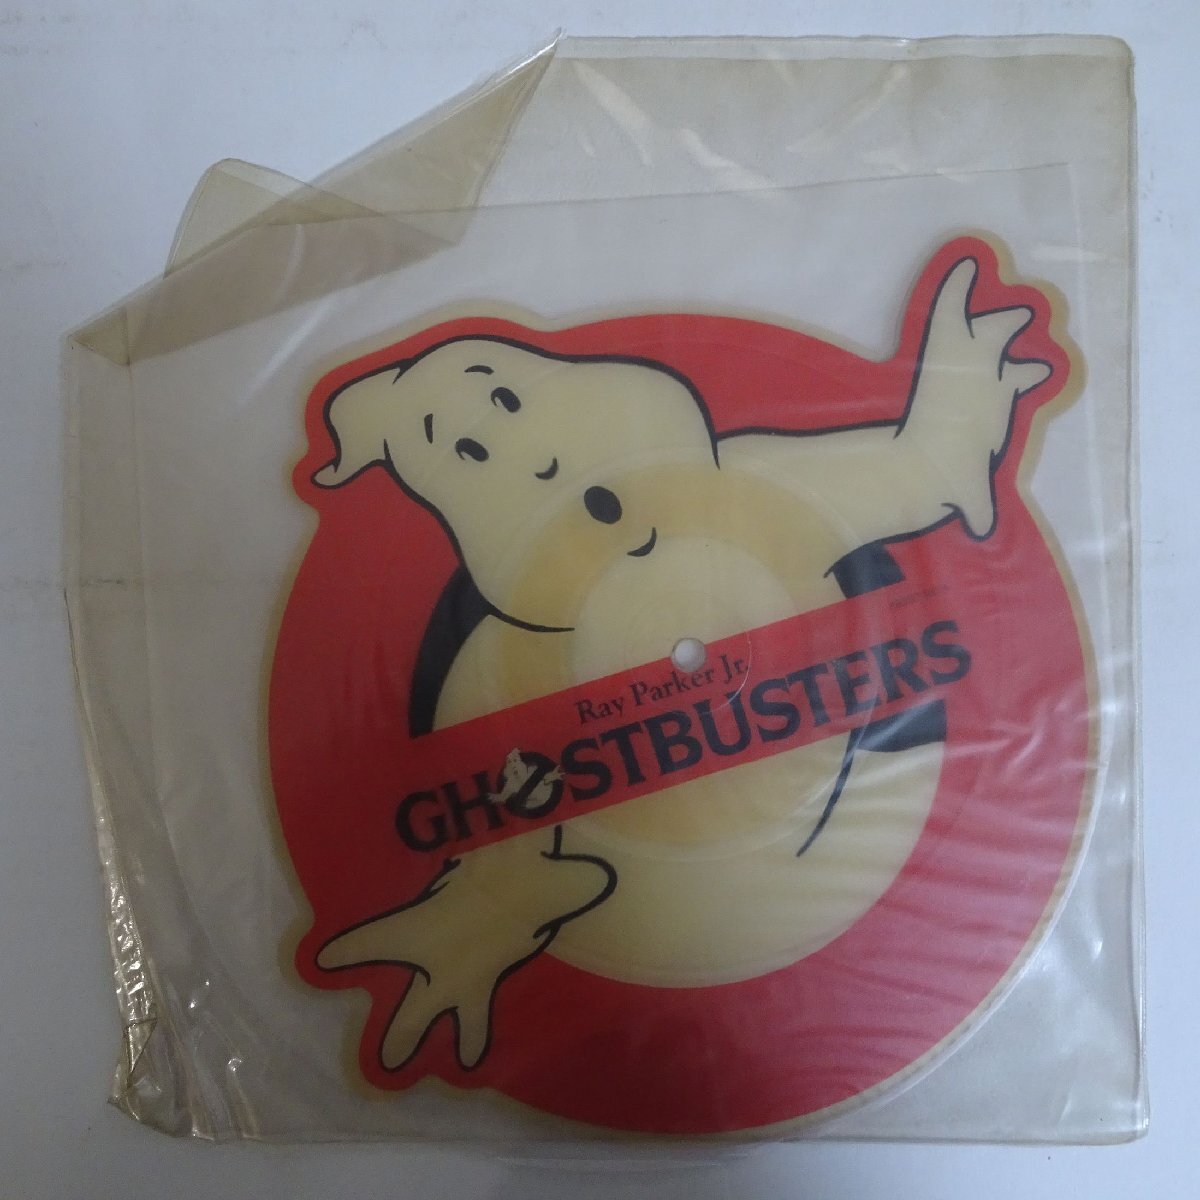 14030427;【UK盤/7inch/45RPM/ピクチャーディスク】Ray Parker Jr. / Ghostbustersの画像1